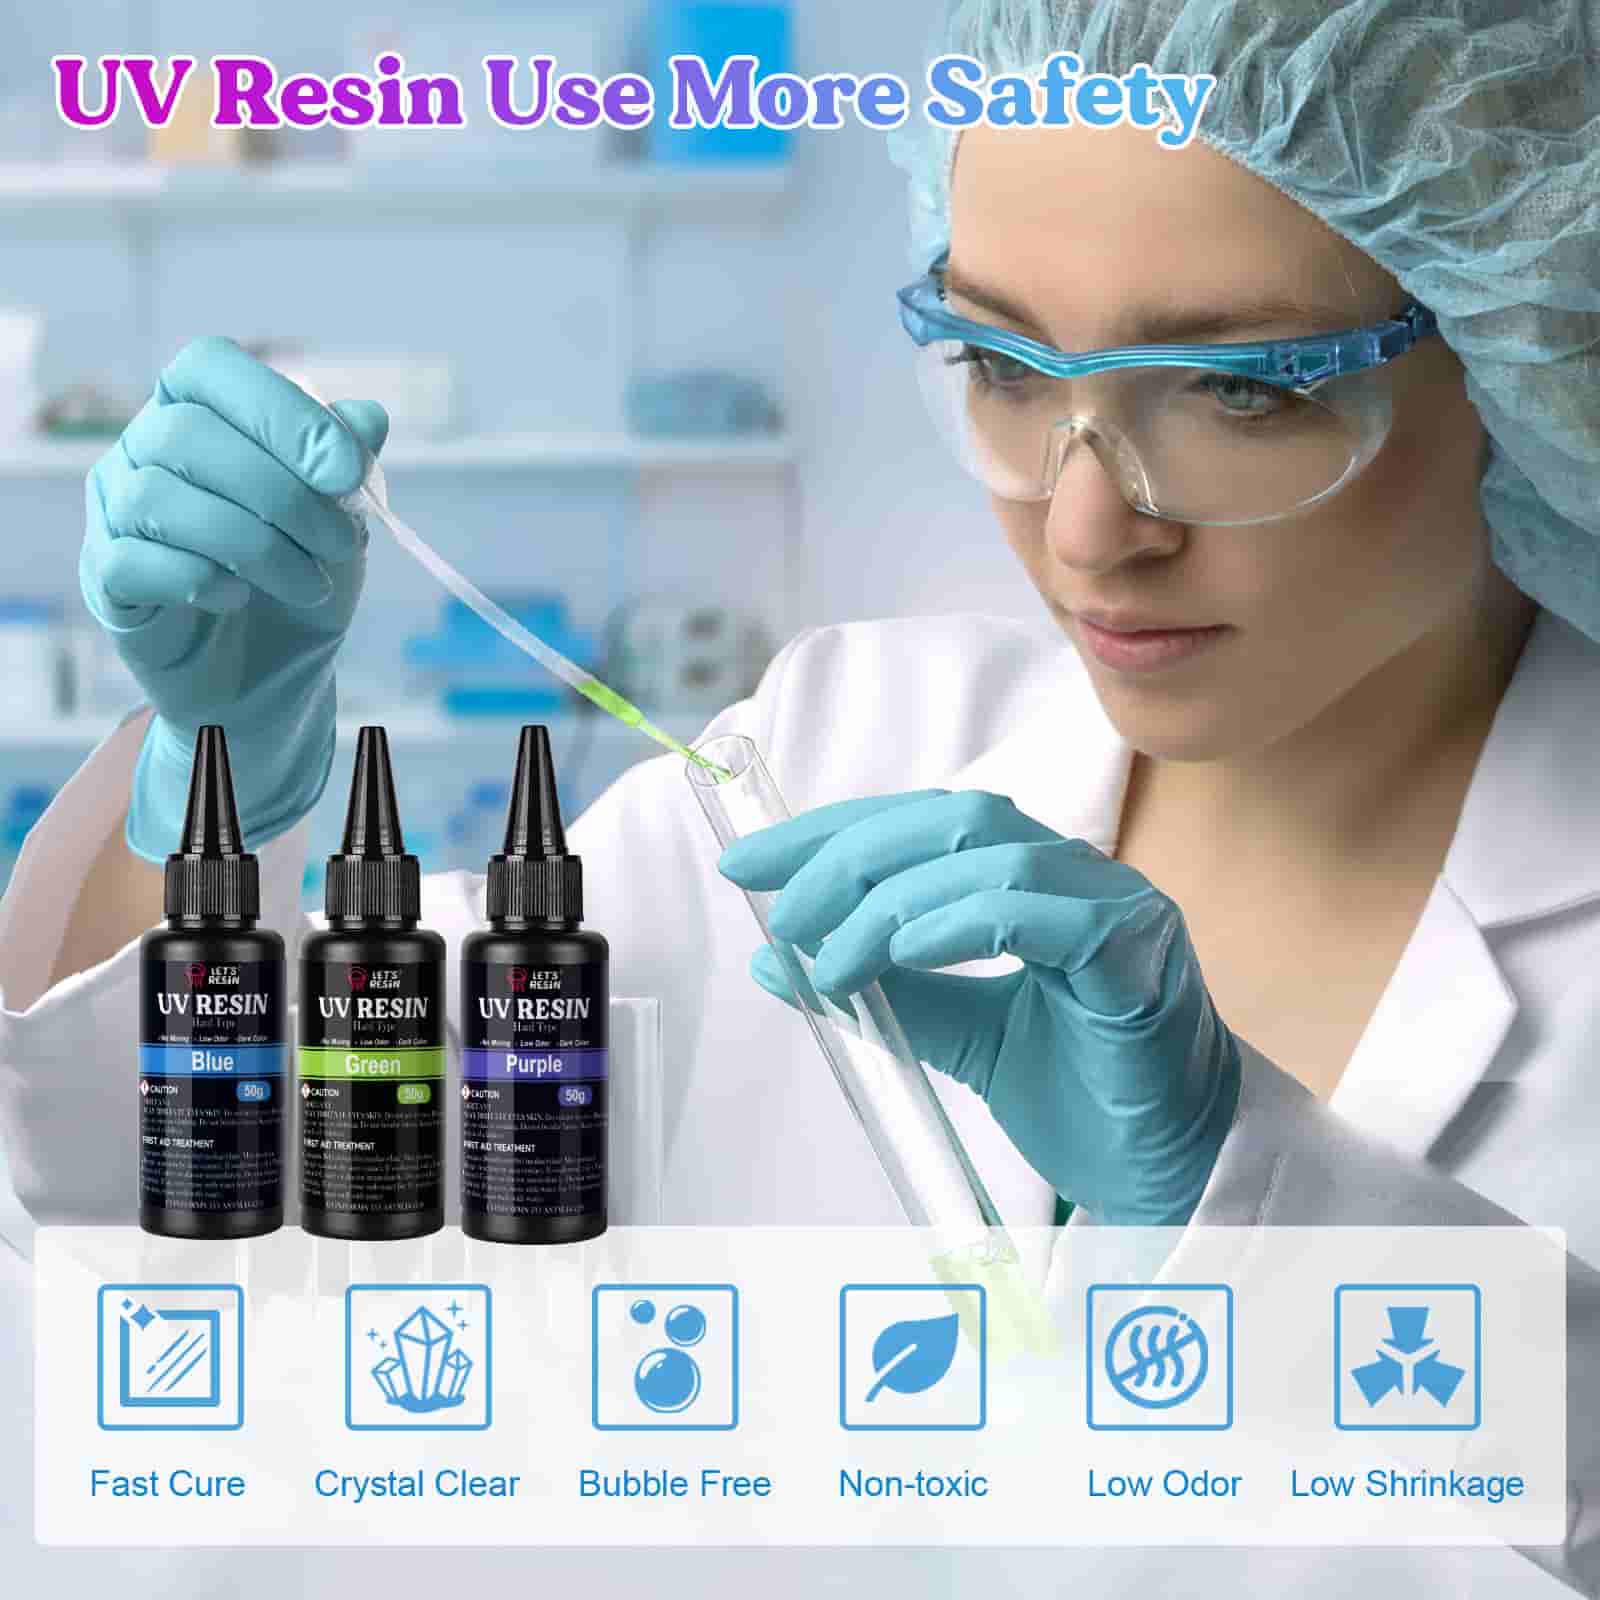 Let's Resin 3 Colors UV Resin Kit with Light&Silicone Mat